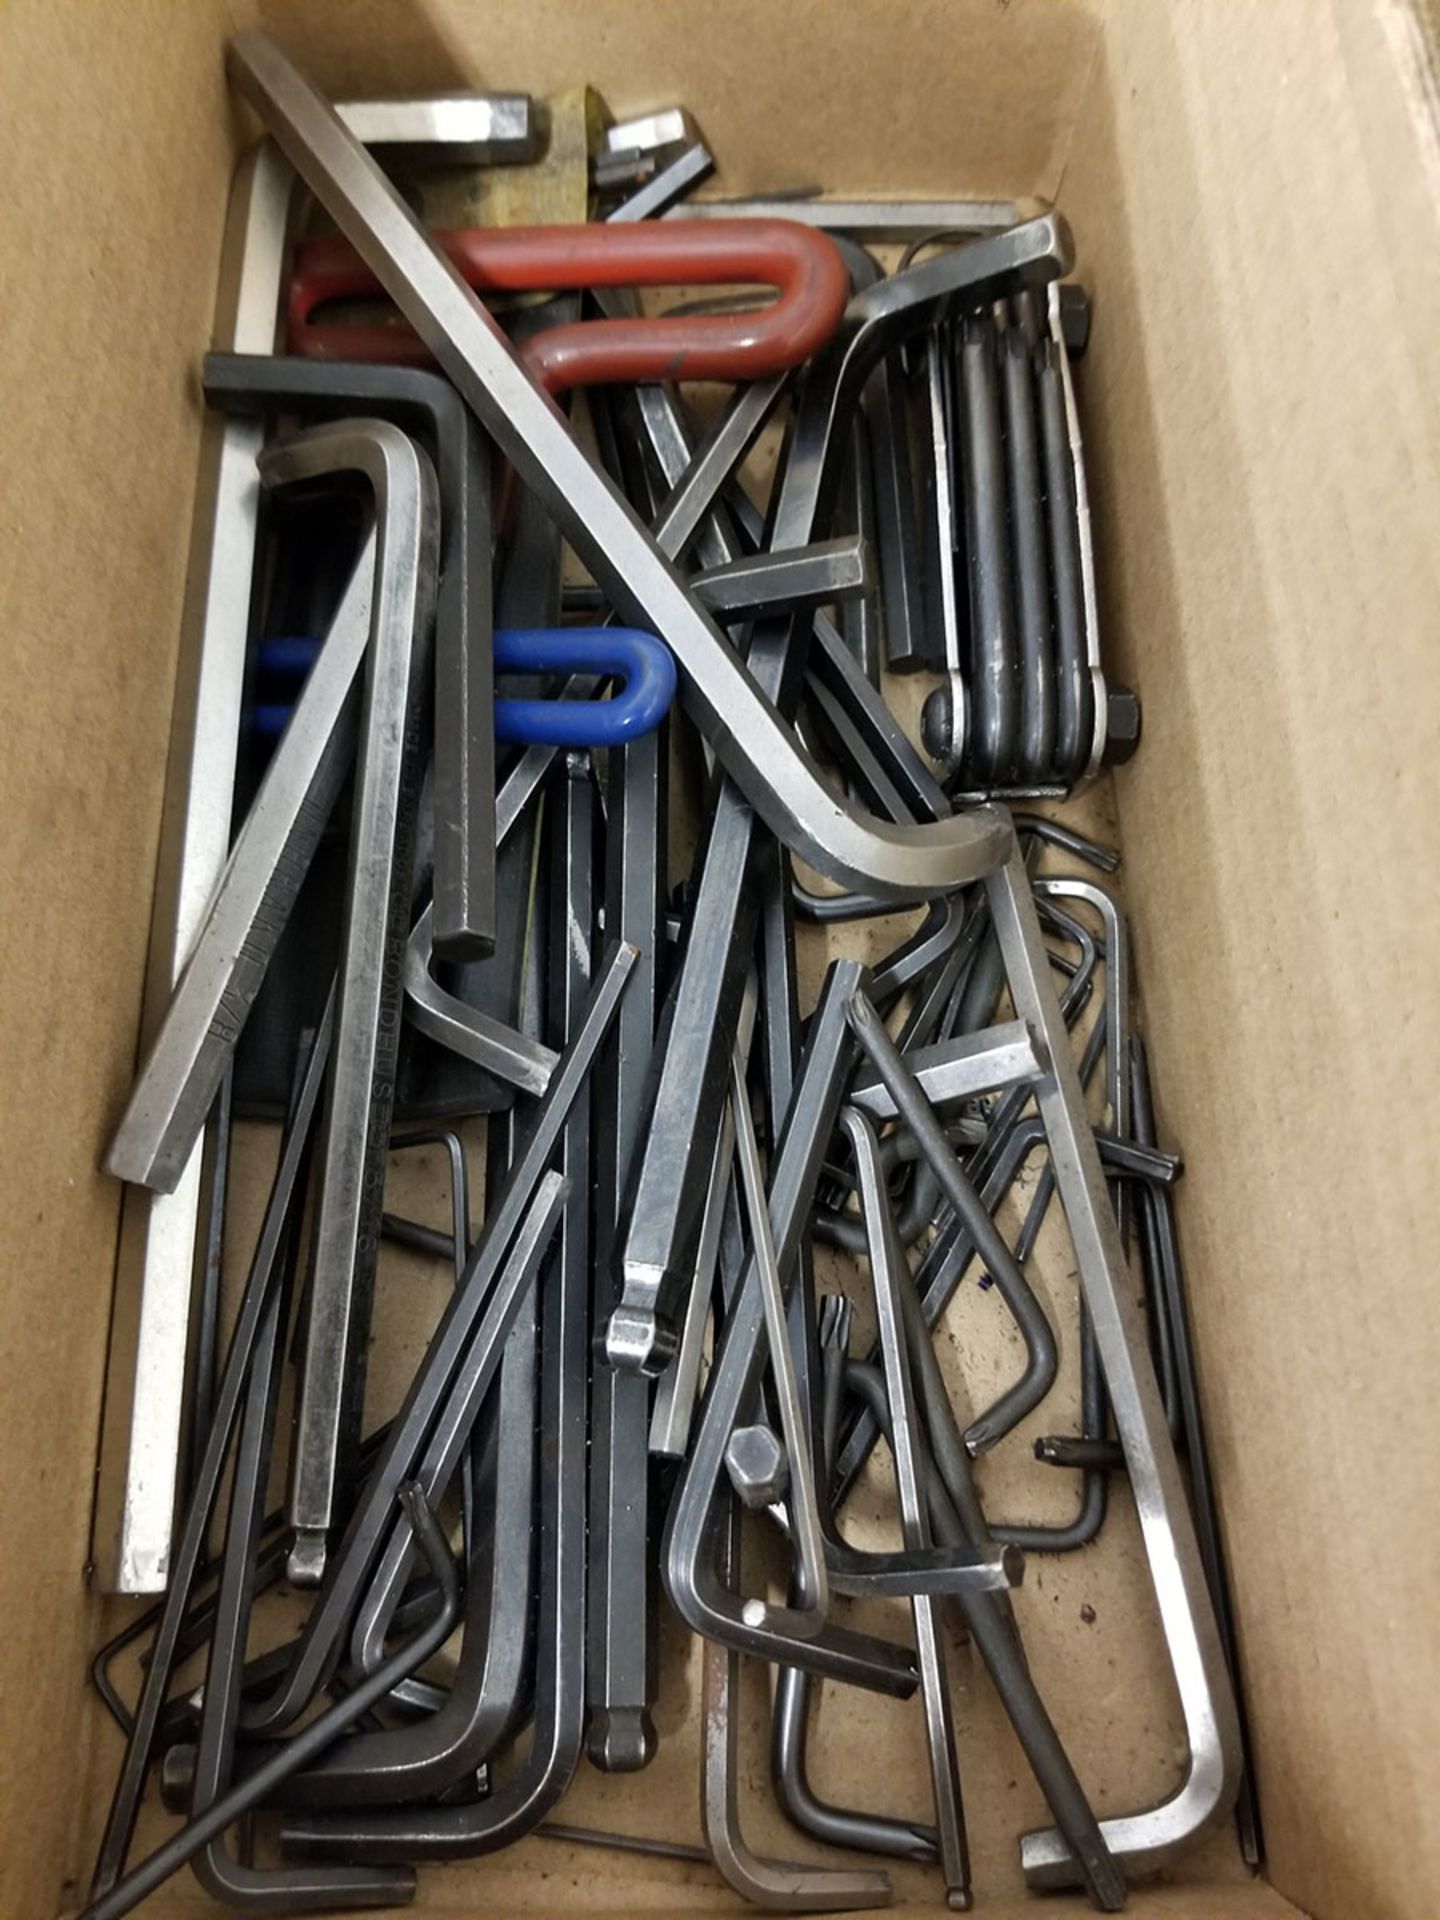 BOX OF ALLEN WRENCHES HEX KEY WRENCHES, ASSORTED SIZES